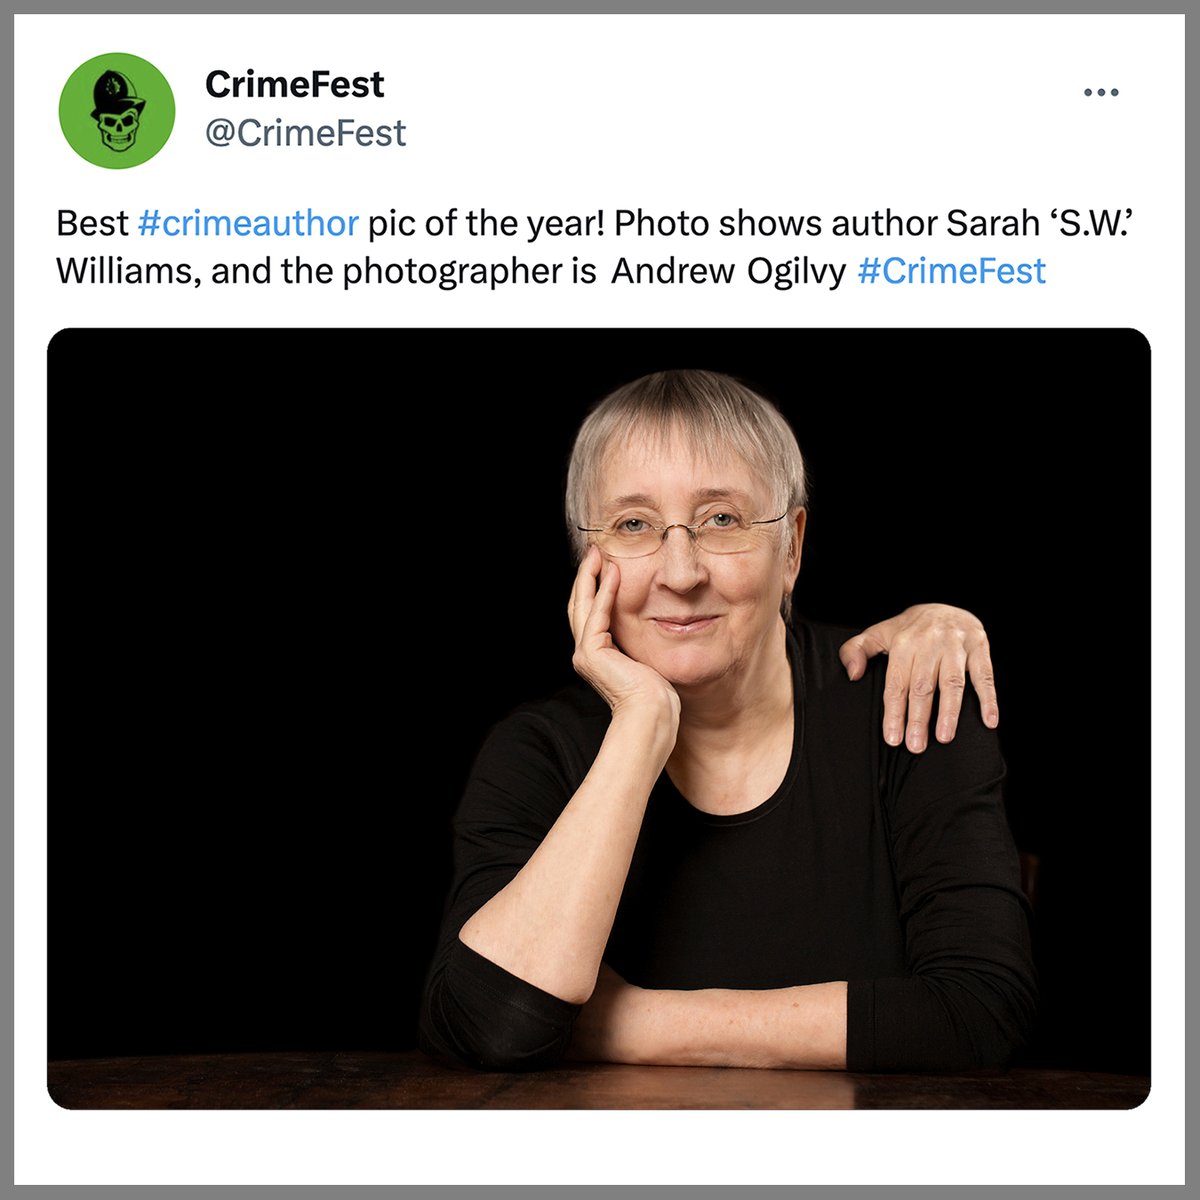 ‘Dismembering’ author SW Williams left hand and placing it on her shoulder was a lot of fun as was working with Sarah.

Thanks  to @CrimeFest for choosing the image as the best #CrimeAuthor 📸 of  the year at their recent festival where 'the pen is bloodier than the  sword'.